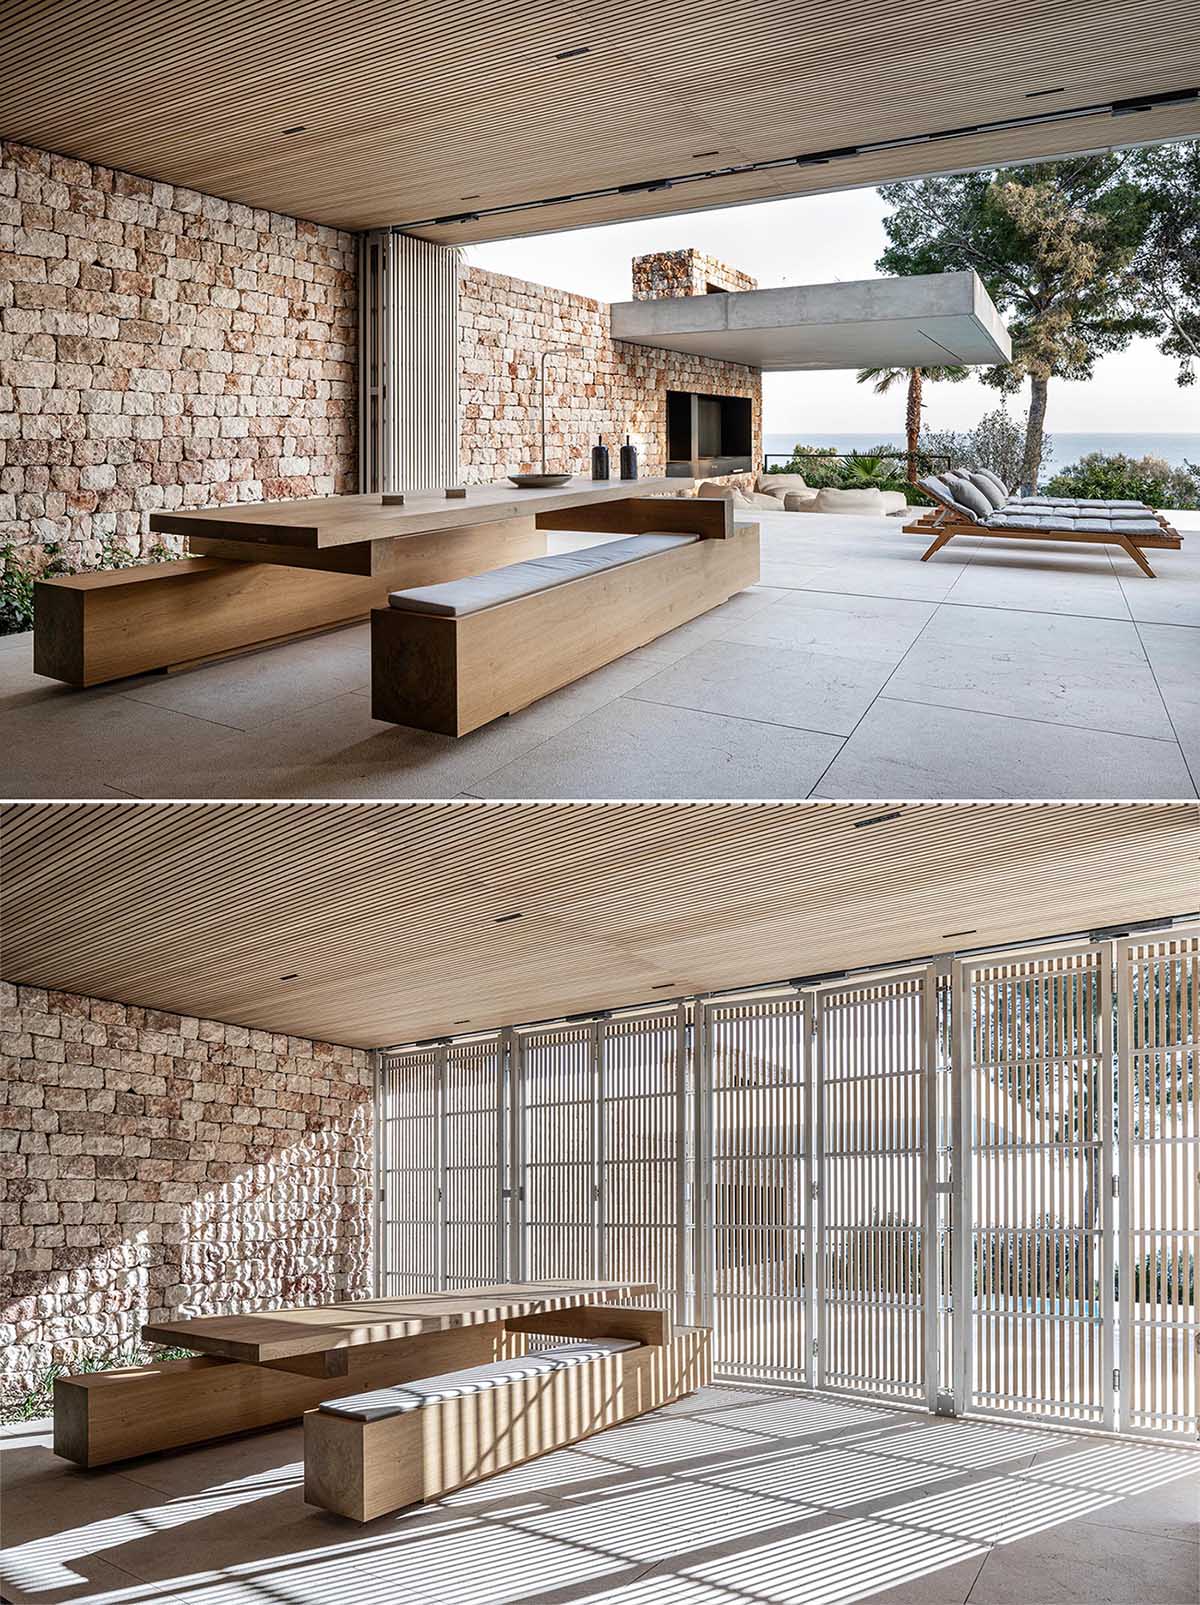 This modern covered dining area is a furnished with a custom large wood table with benches. The stone wall from the kitchen also seamlessly flows through to the outdoor areas.